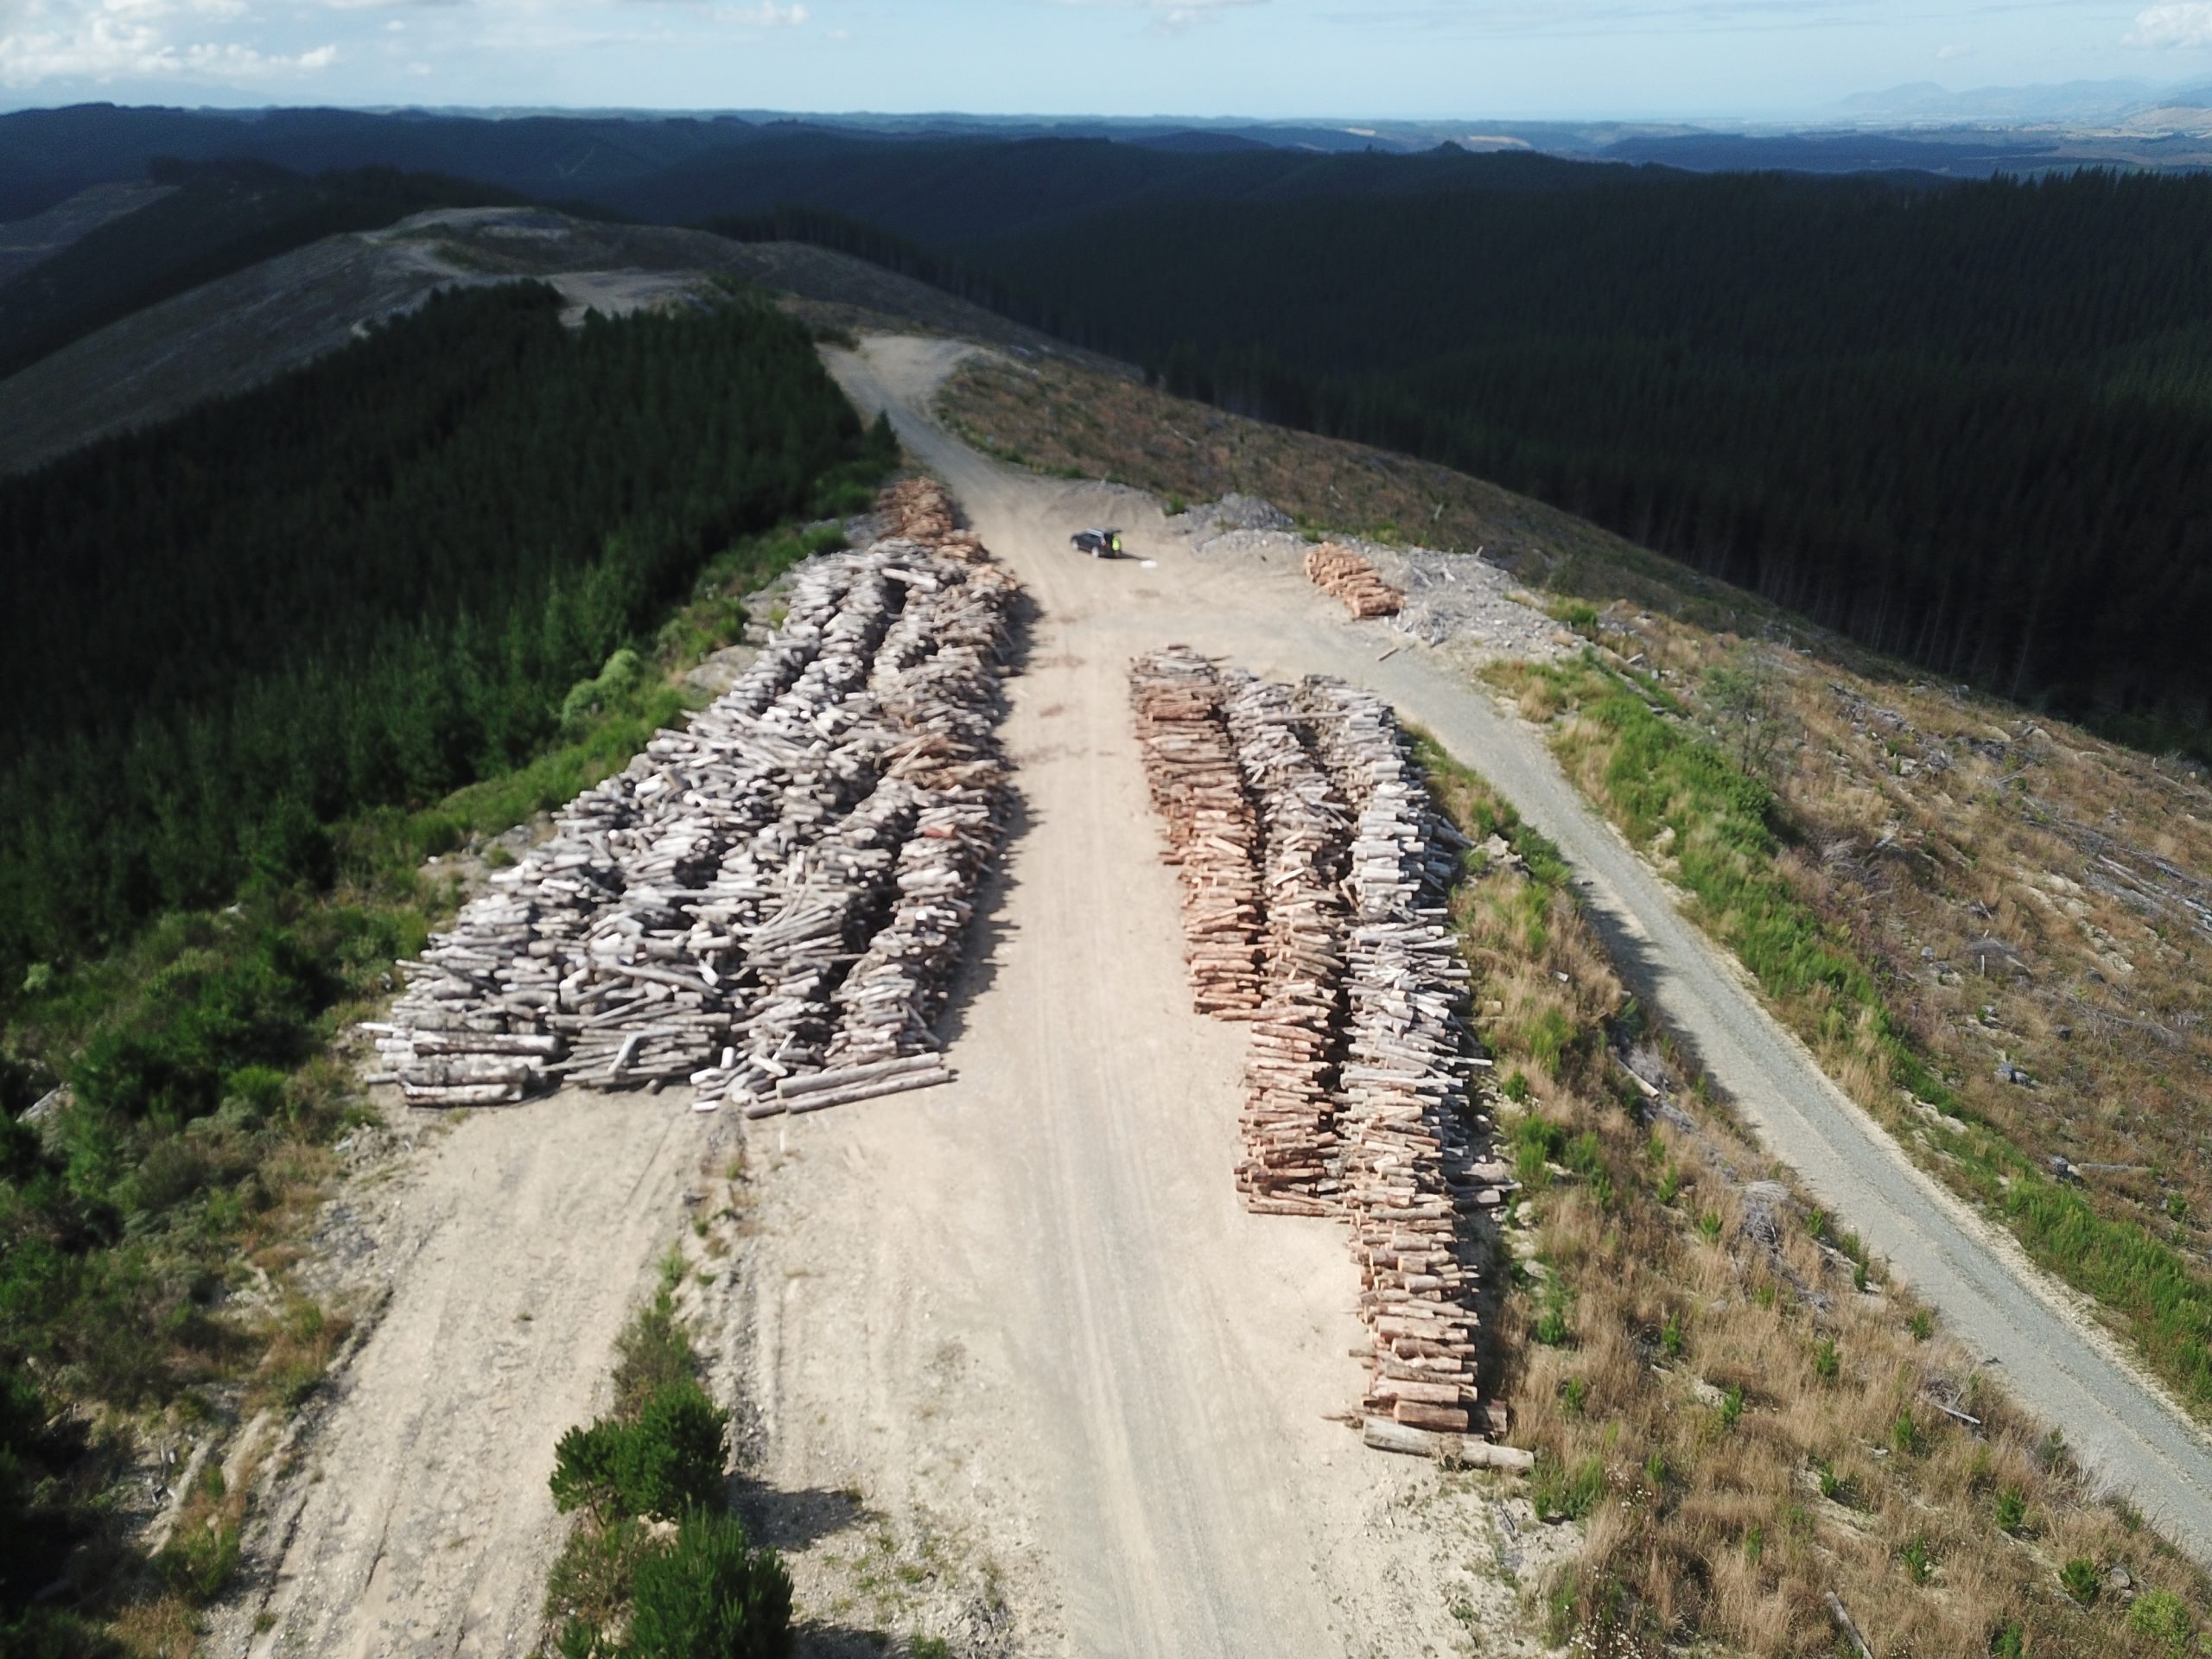 How forestry slash can become a positive resource